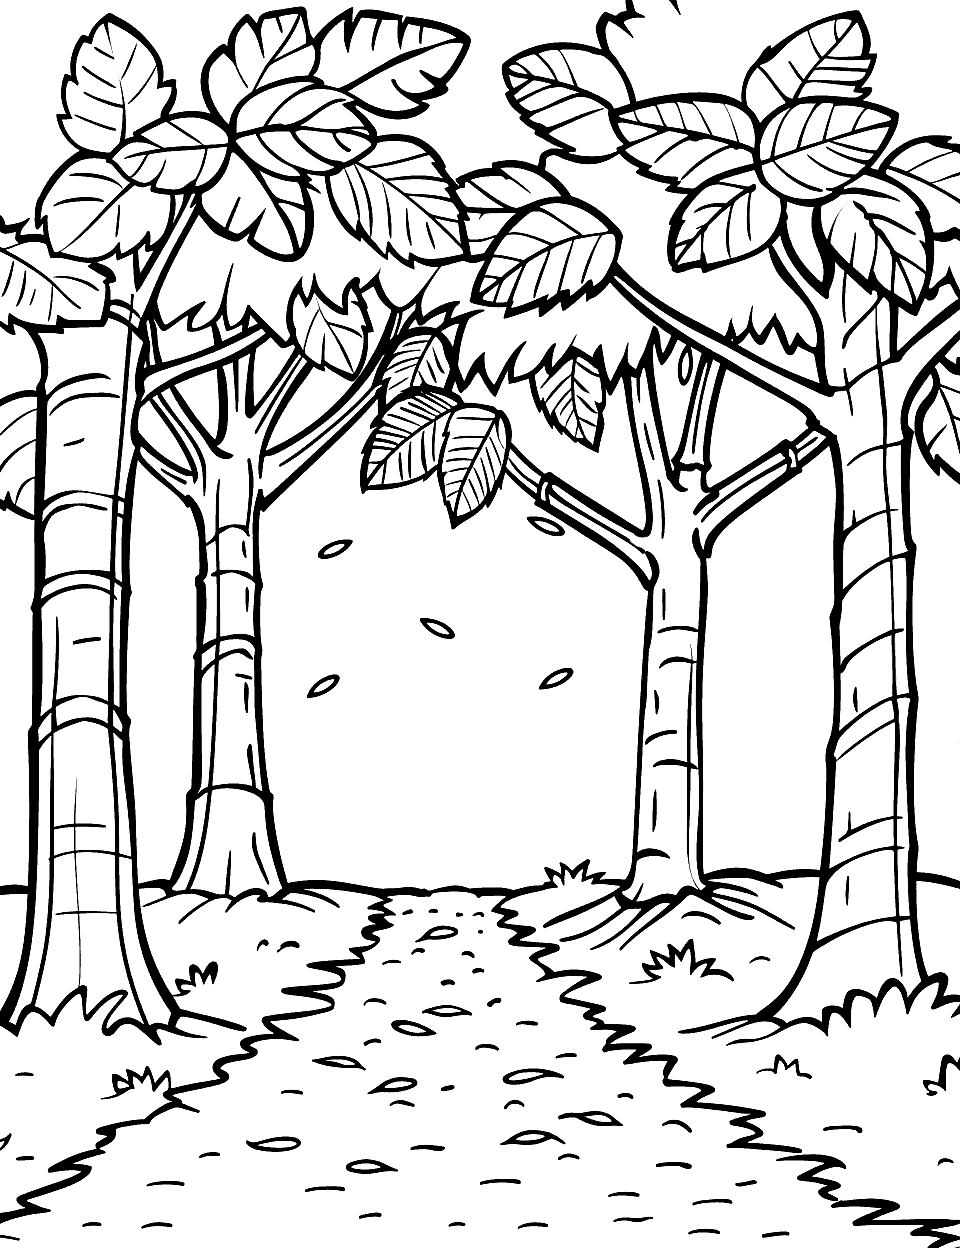 Forest Pathway Coloring Page - A path lined with trees, their leaves in shades of autumn.